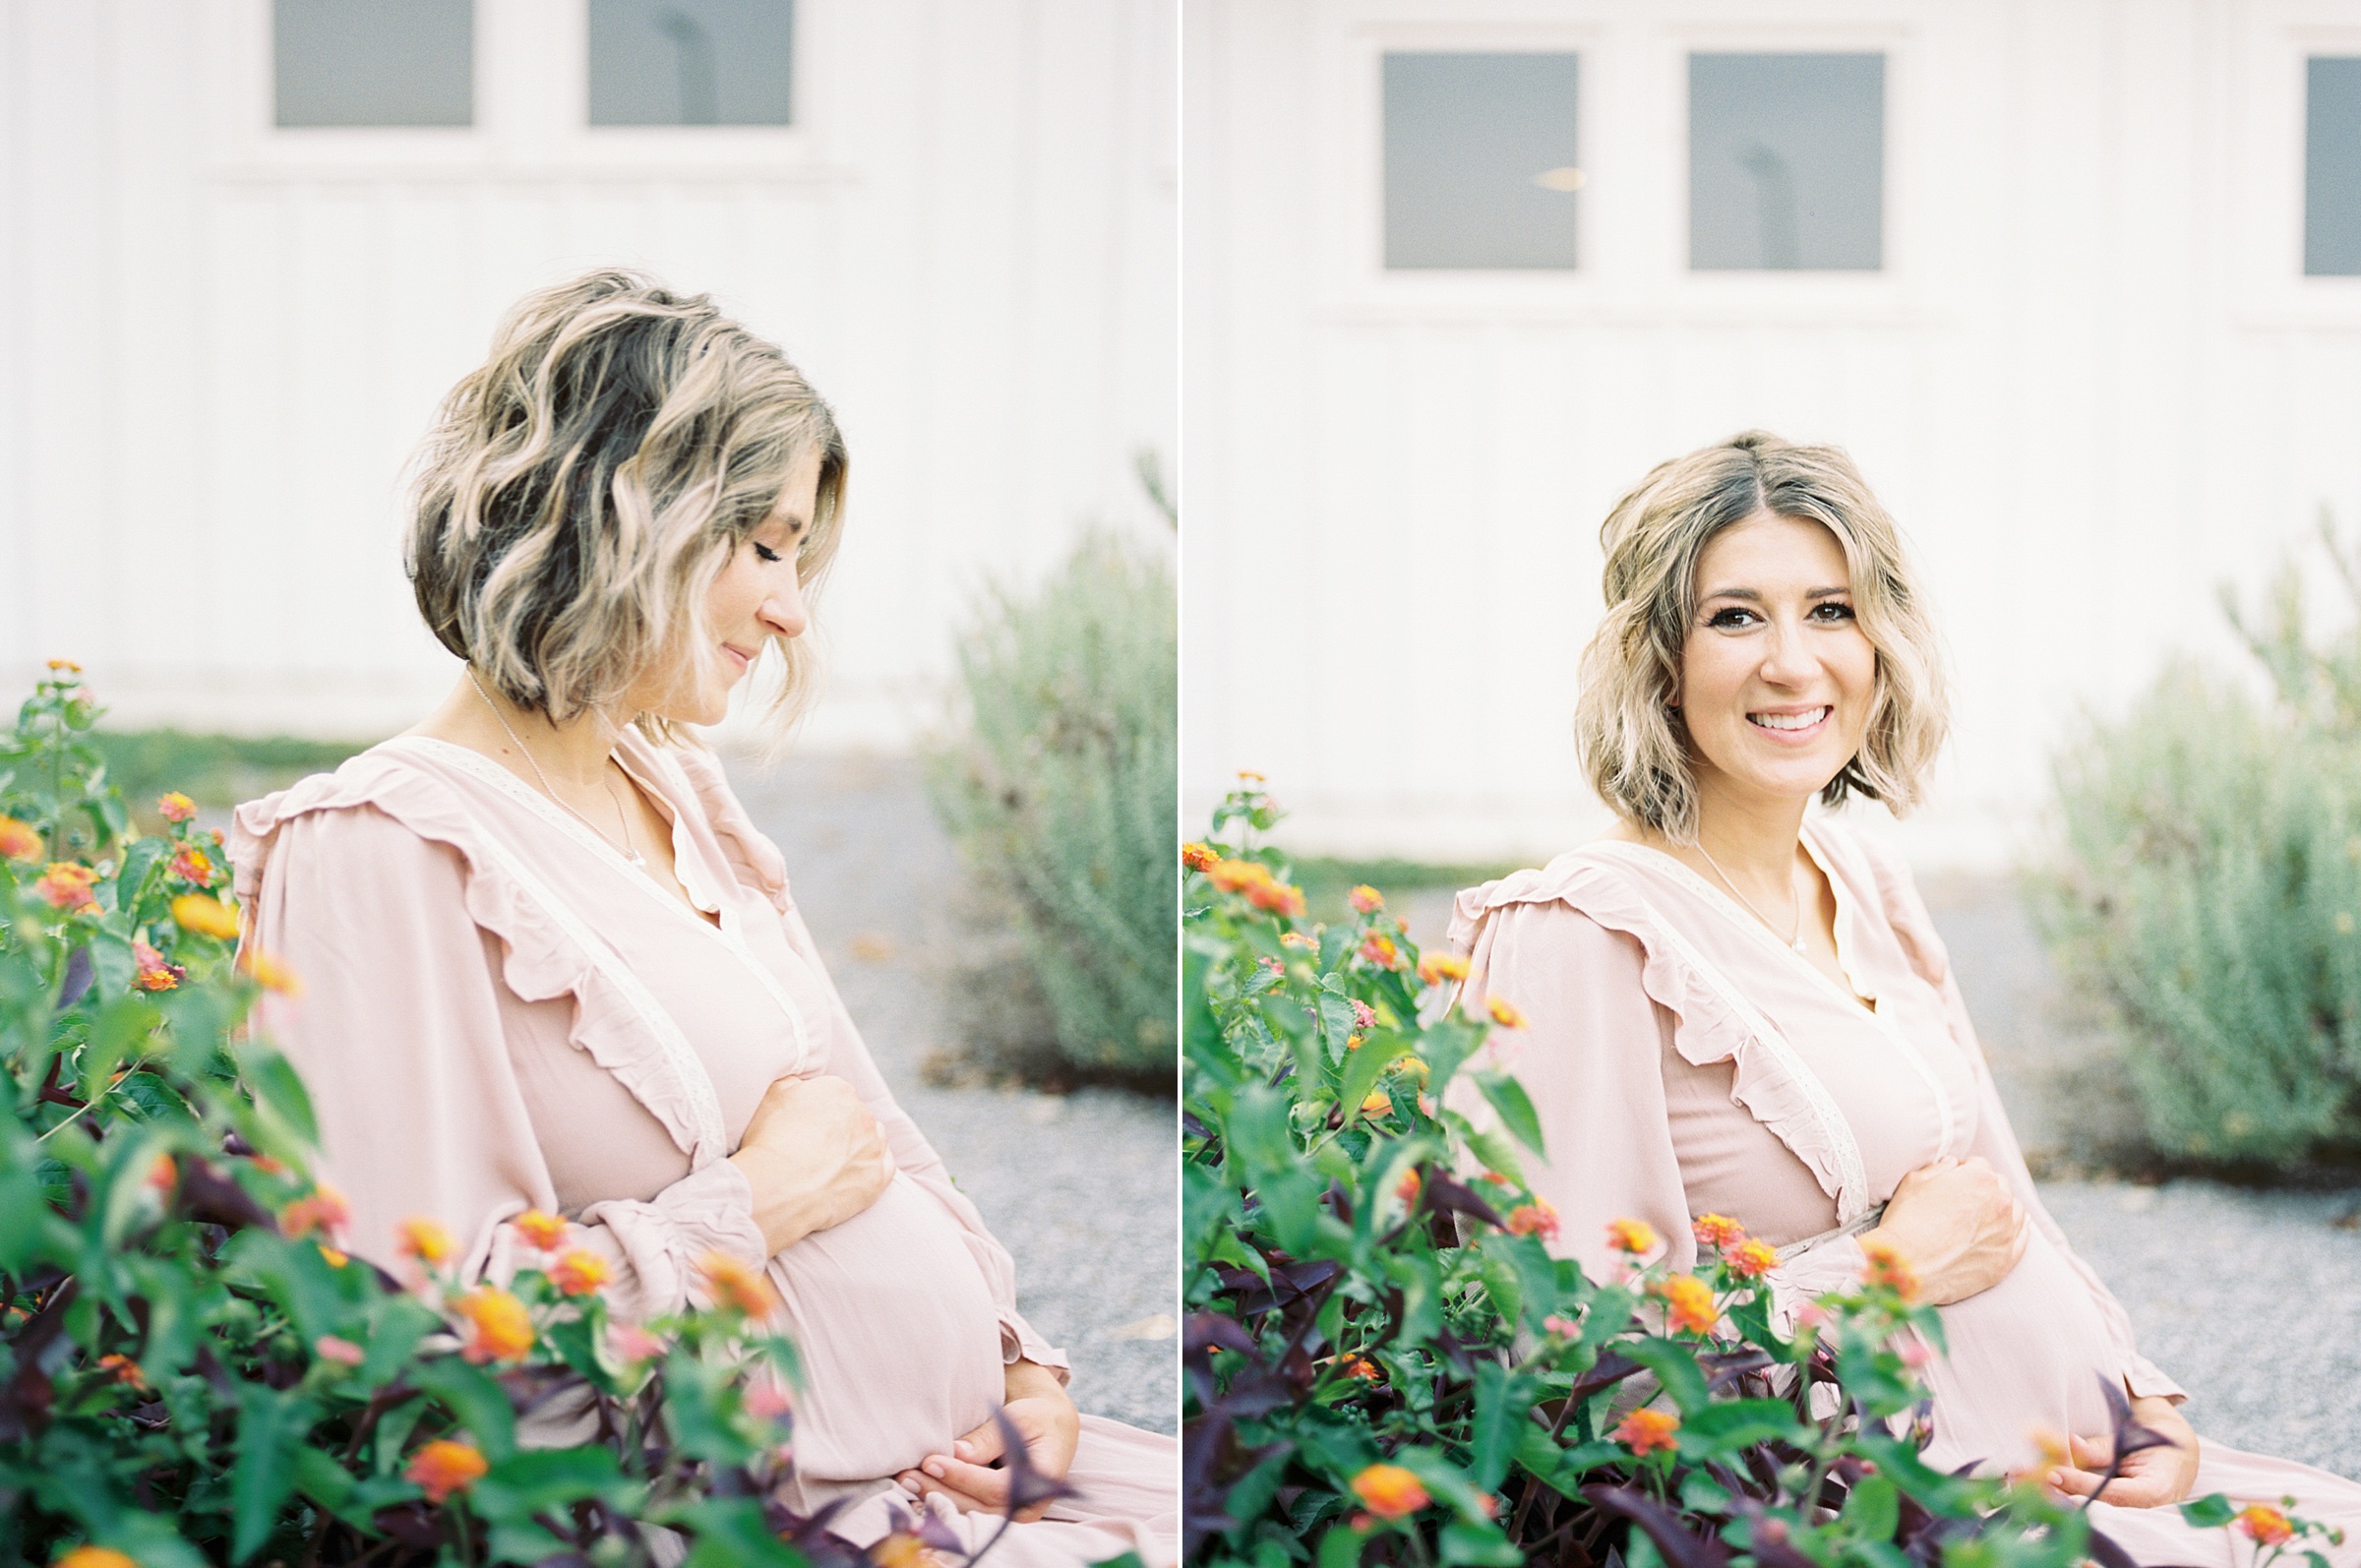 Woman sitting near orange flowers during maternity session